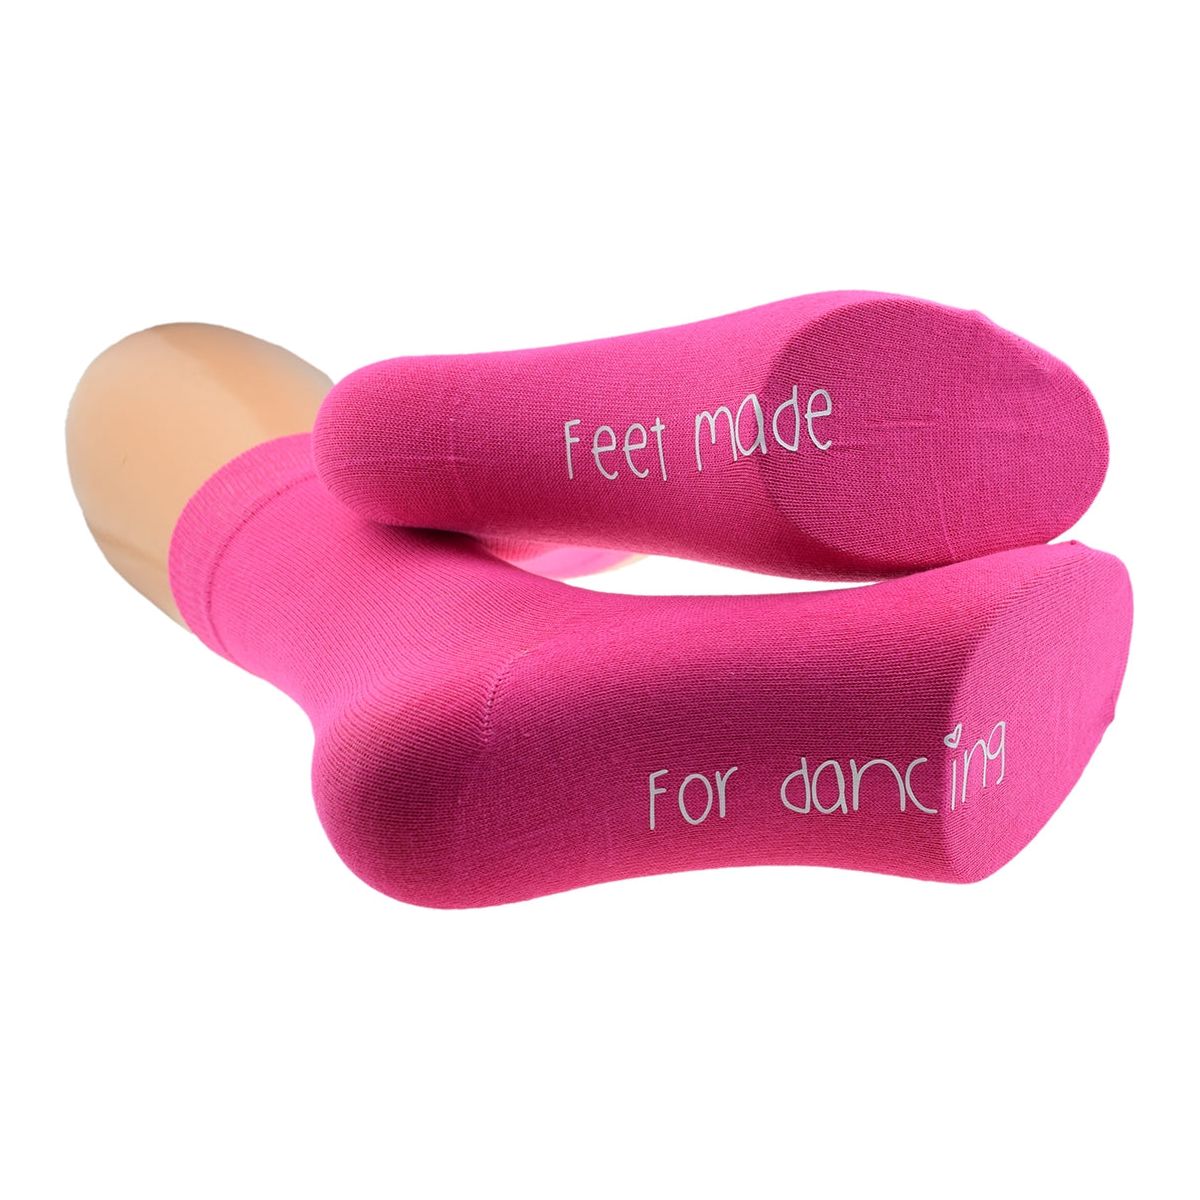 Feet Made for Dancing Ladies Hot Pink Socks - Ashton and Finch